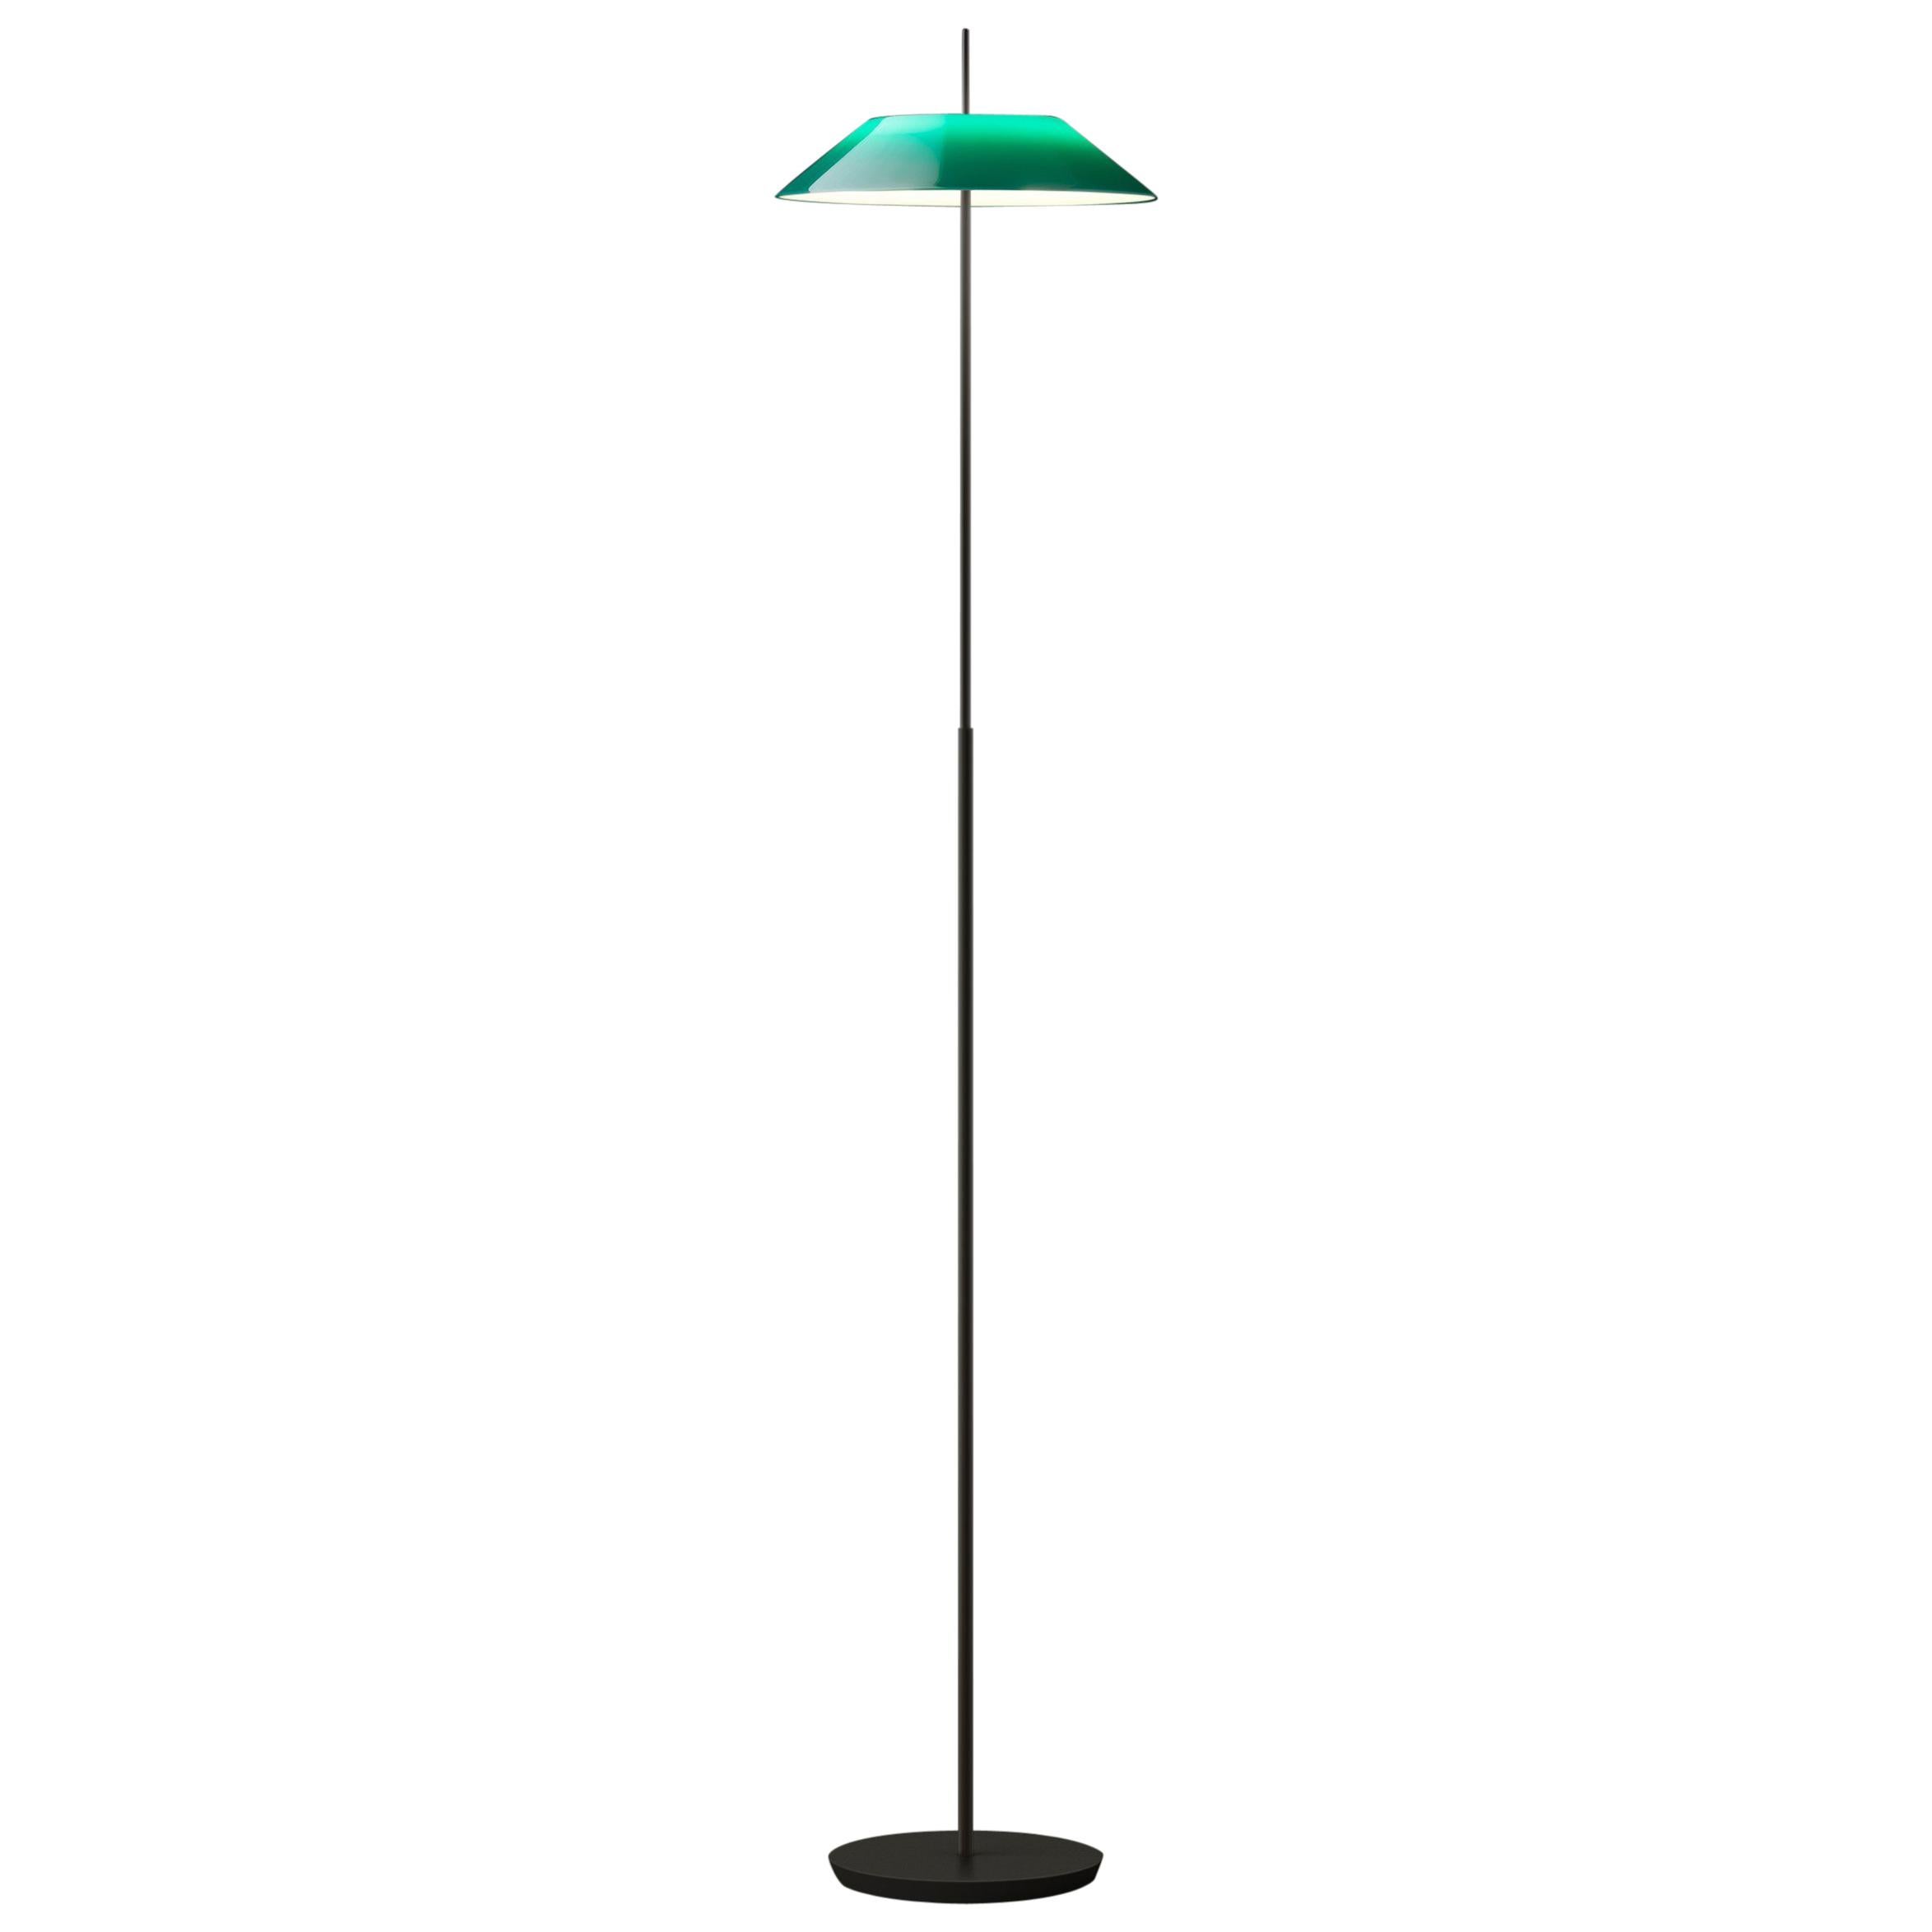 Mayfair LED Floor Lamp in Black Nickel with Green Shade by Diego Fortunato For Sale